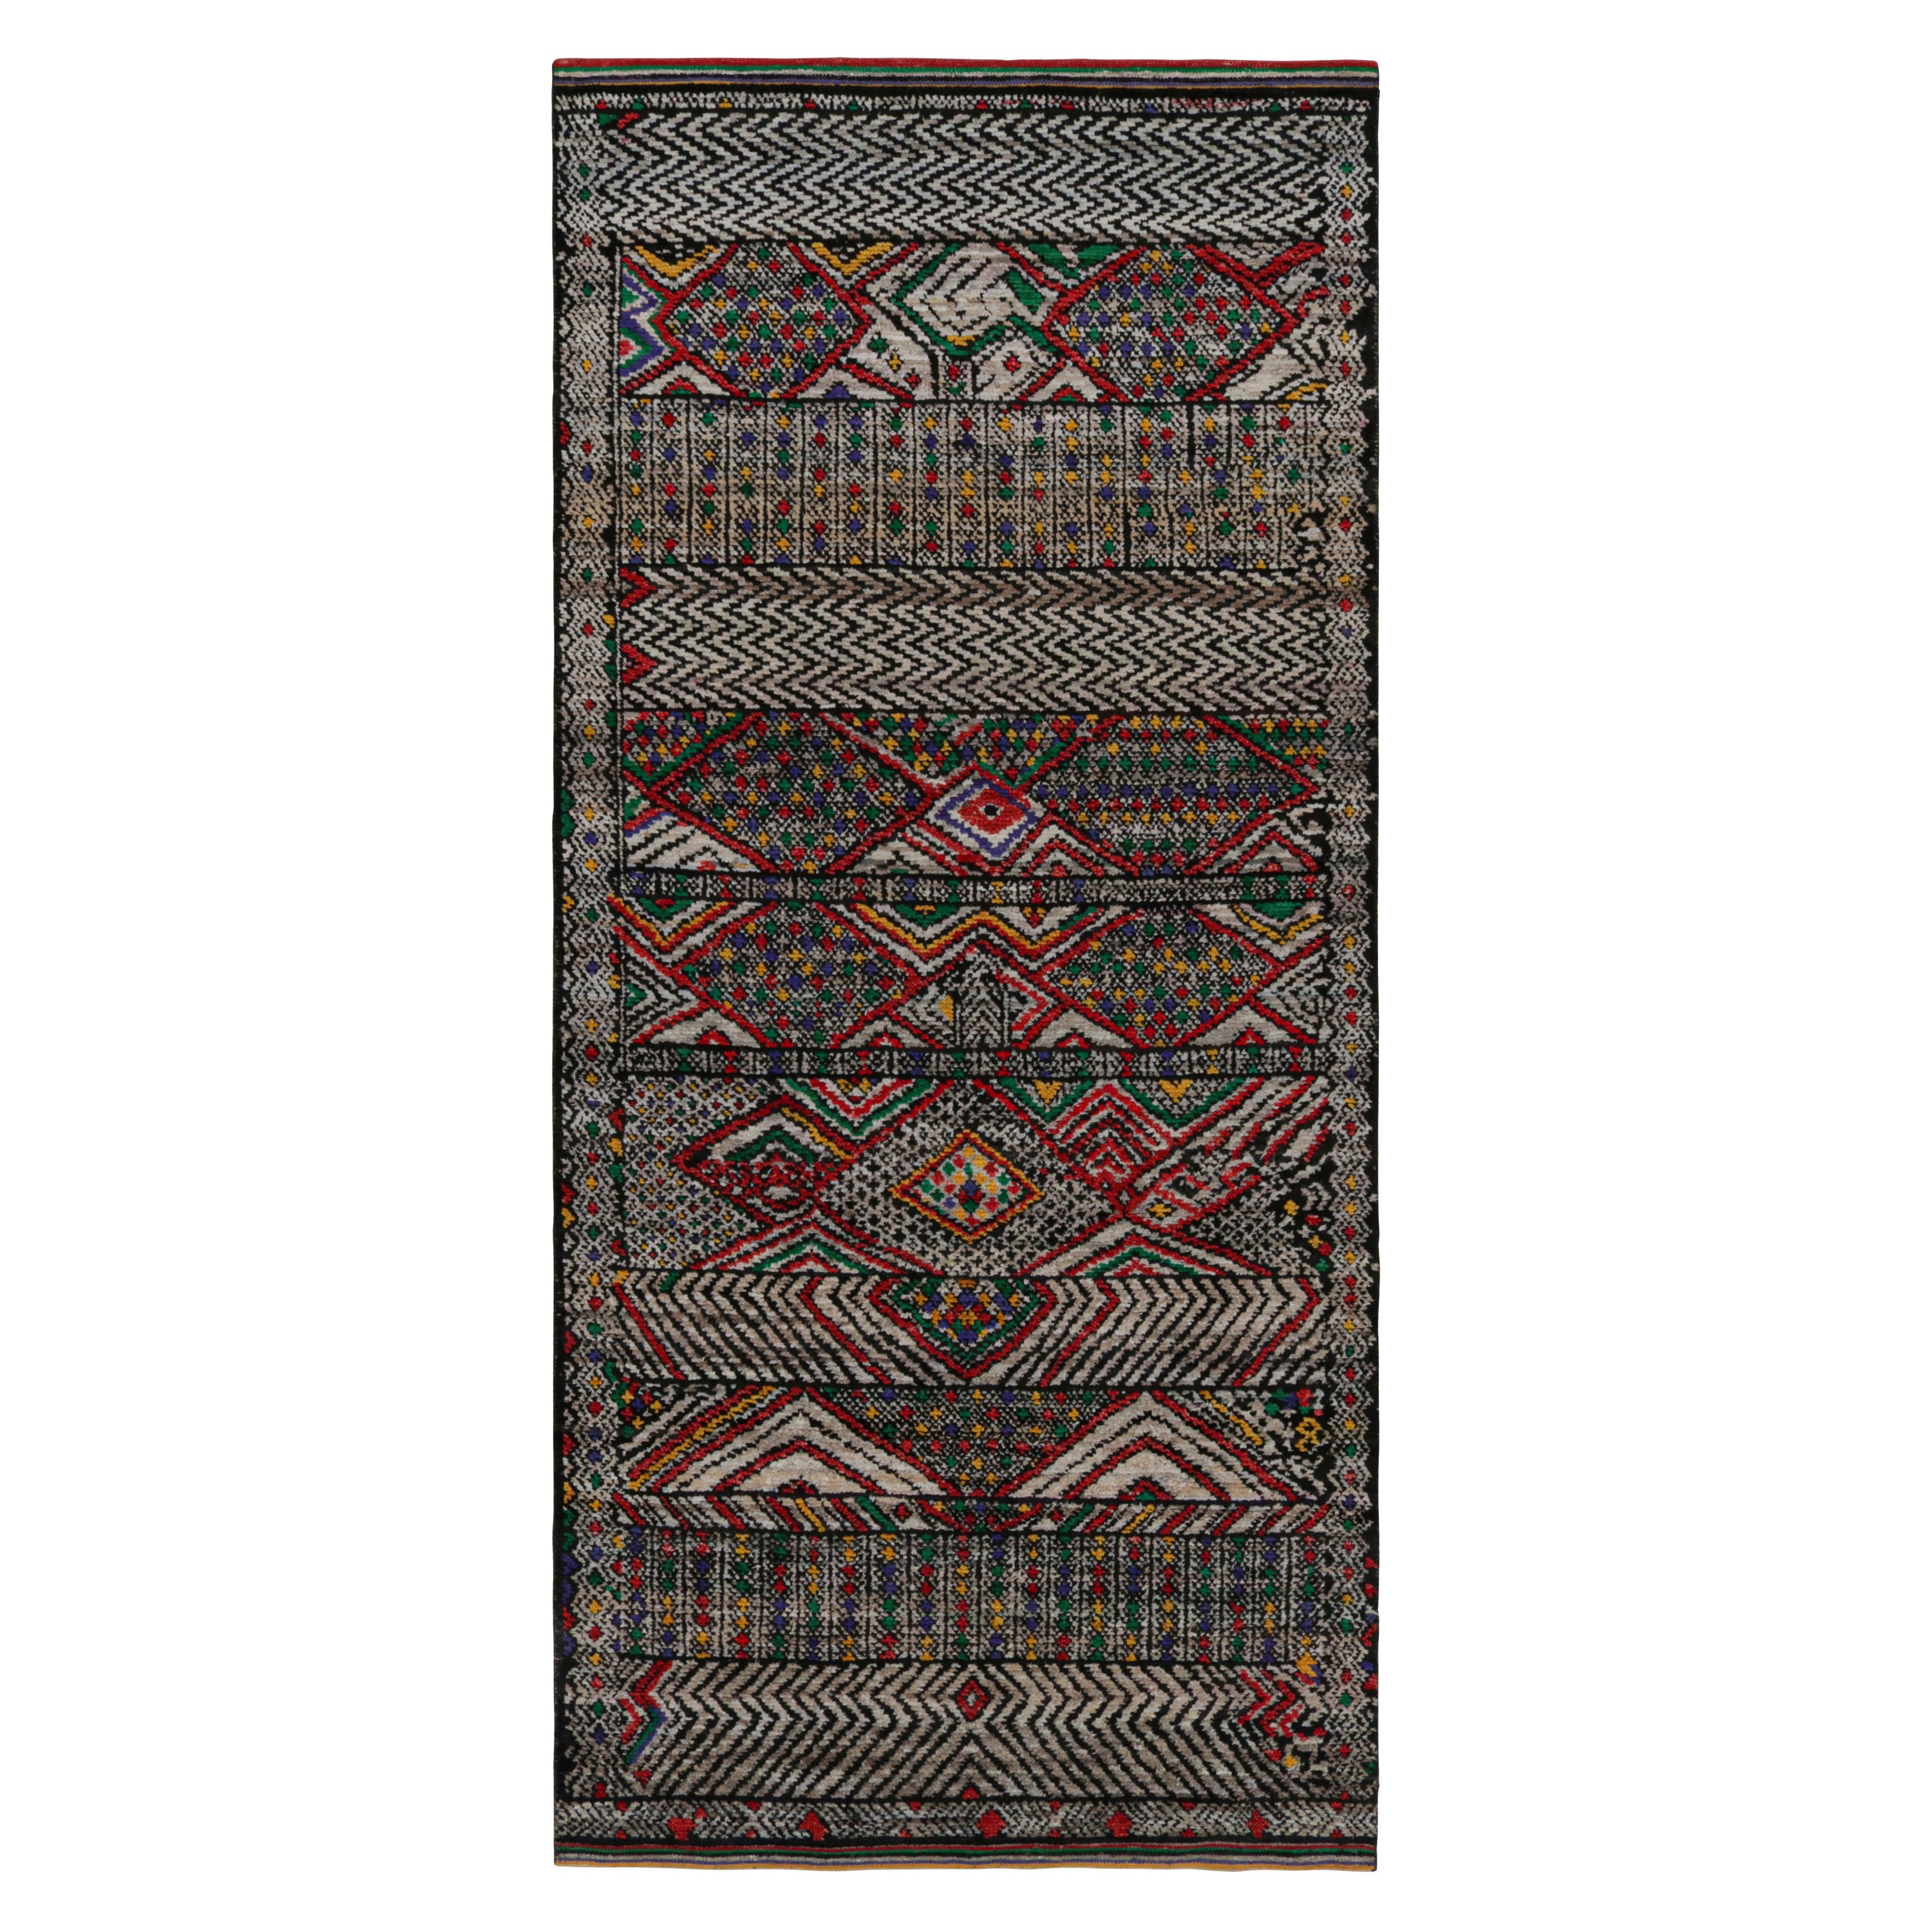 Rug & Kilim’s Modern Moroccan Style Rug with Polychromatic Patterns